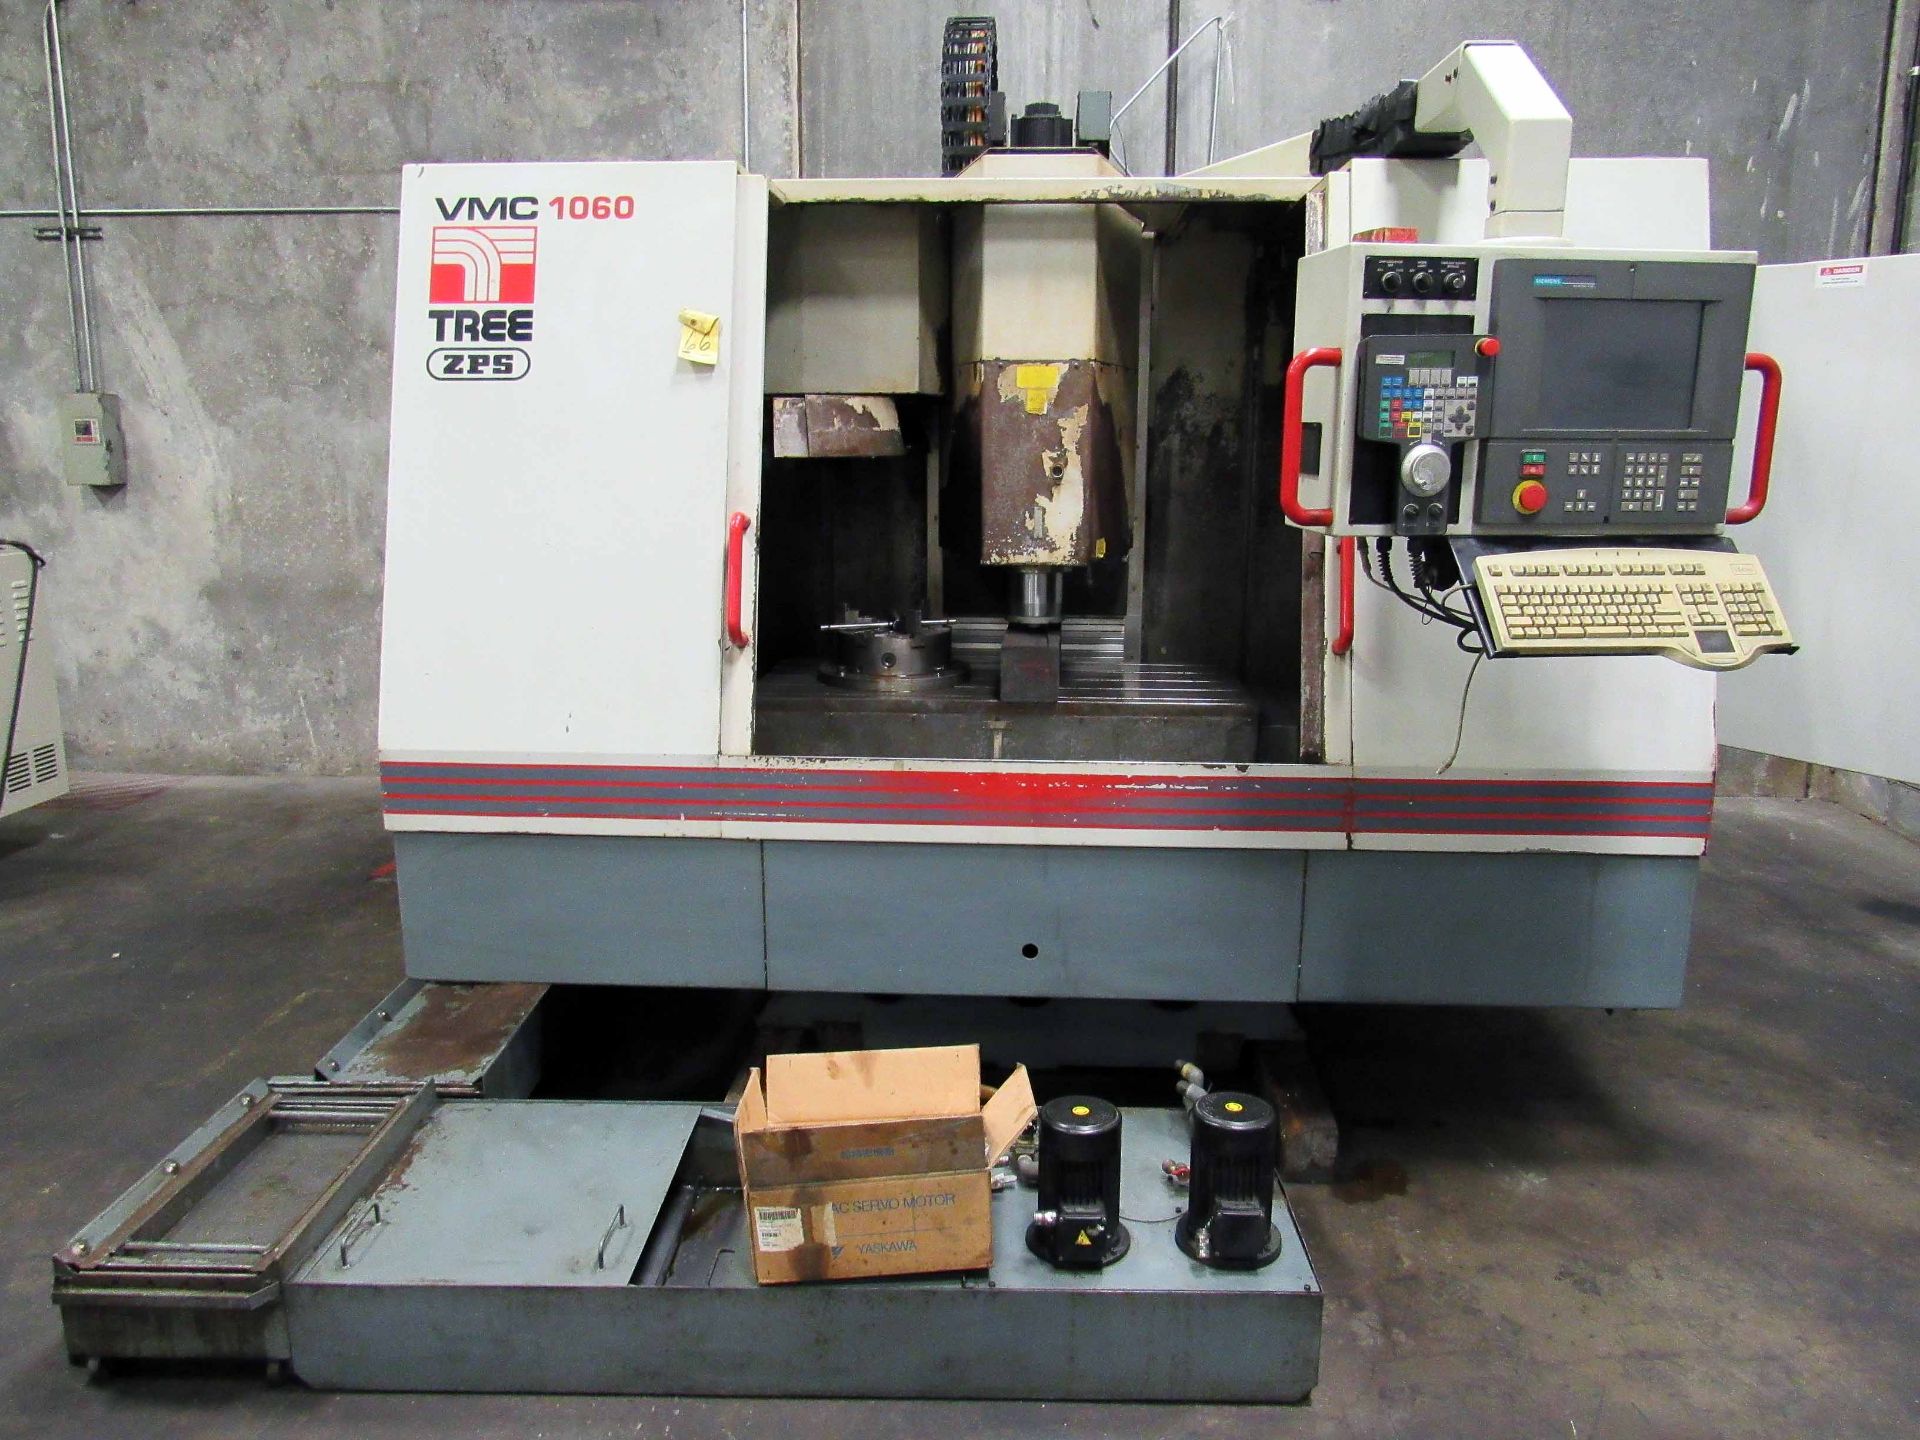 CNC VERTICAL MACHINING CENTER, TREE MDL. 1060/24, Acramatic 2100 CNC control, 50" x 23" table, 4"